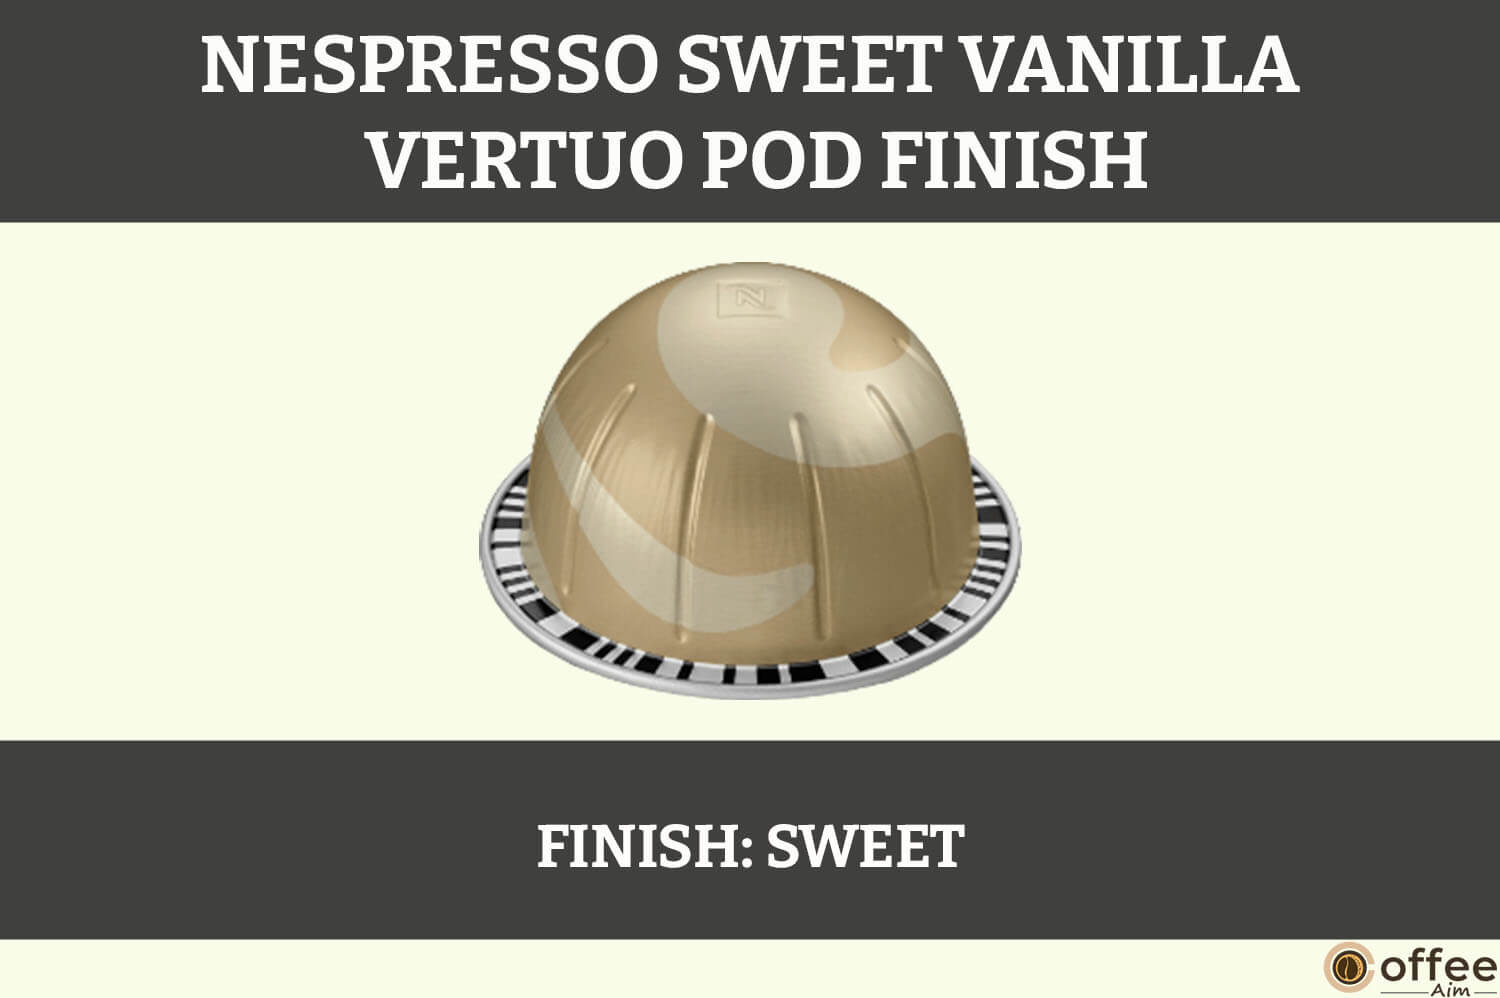 This image represents the finish of Nespresso Sweet Vanilla Vertuo Pod for the article 'Nespresso Sweet Vanilla Vertuo Pod Review'